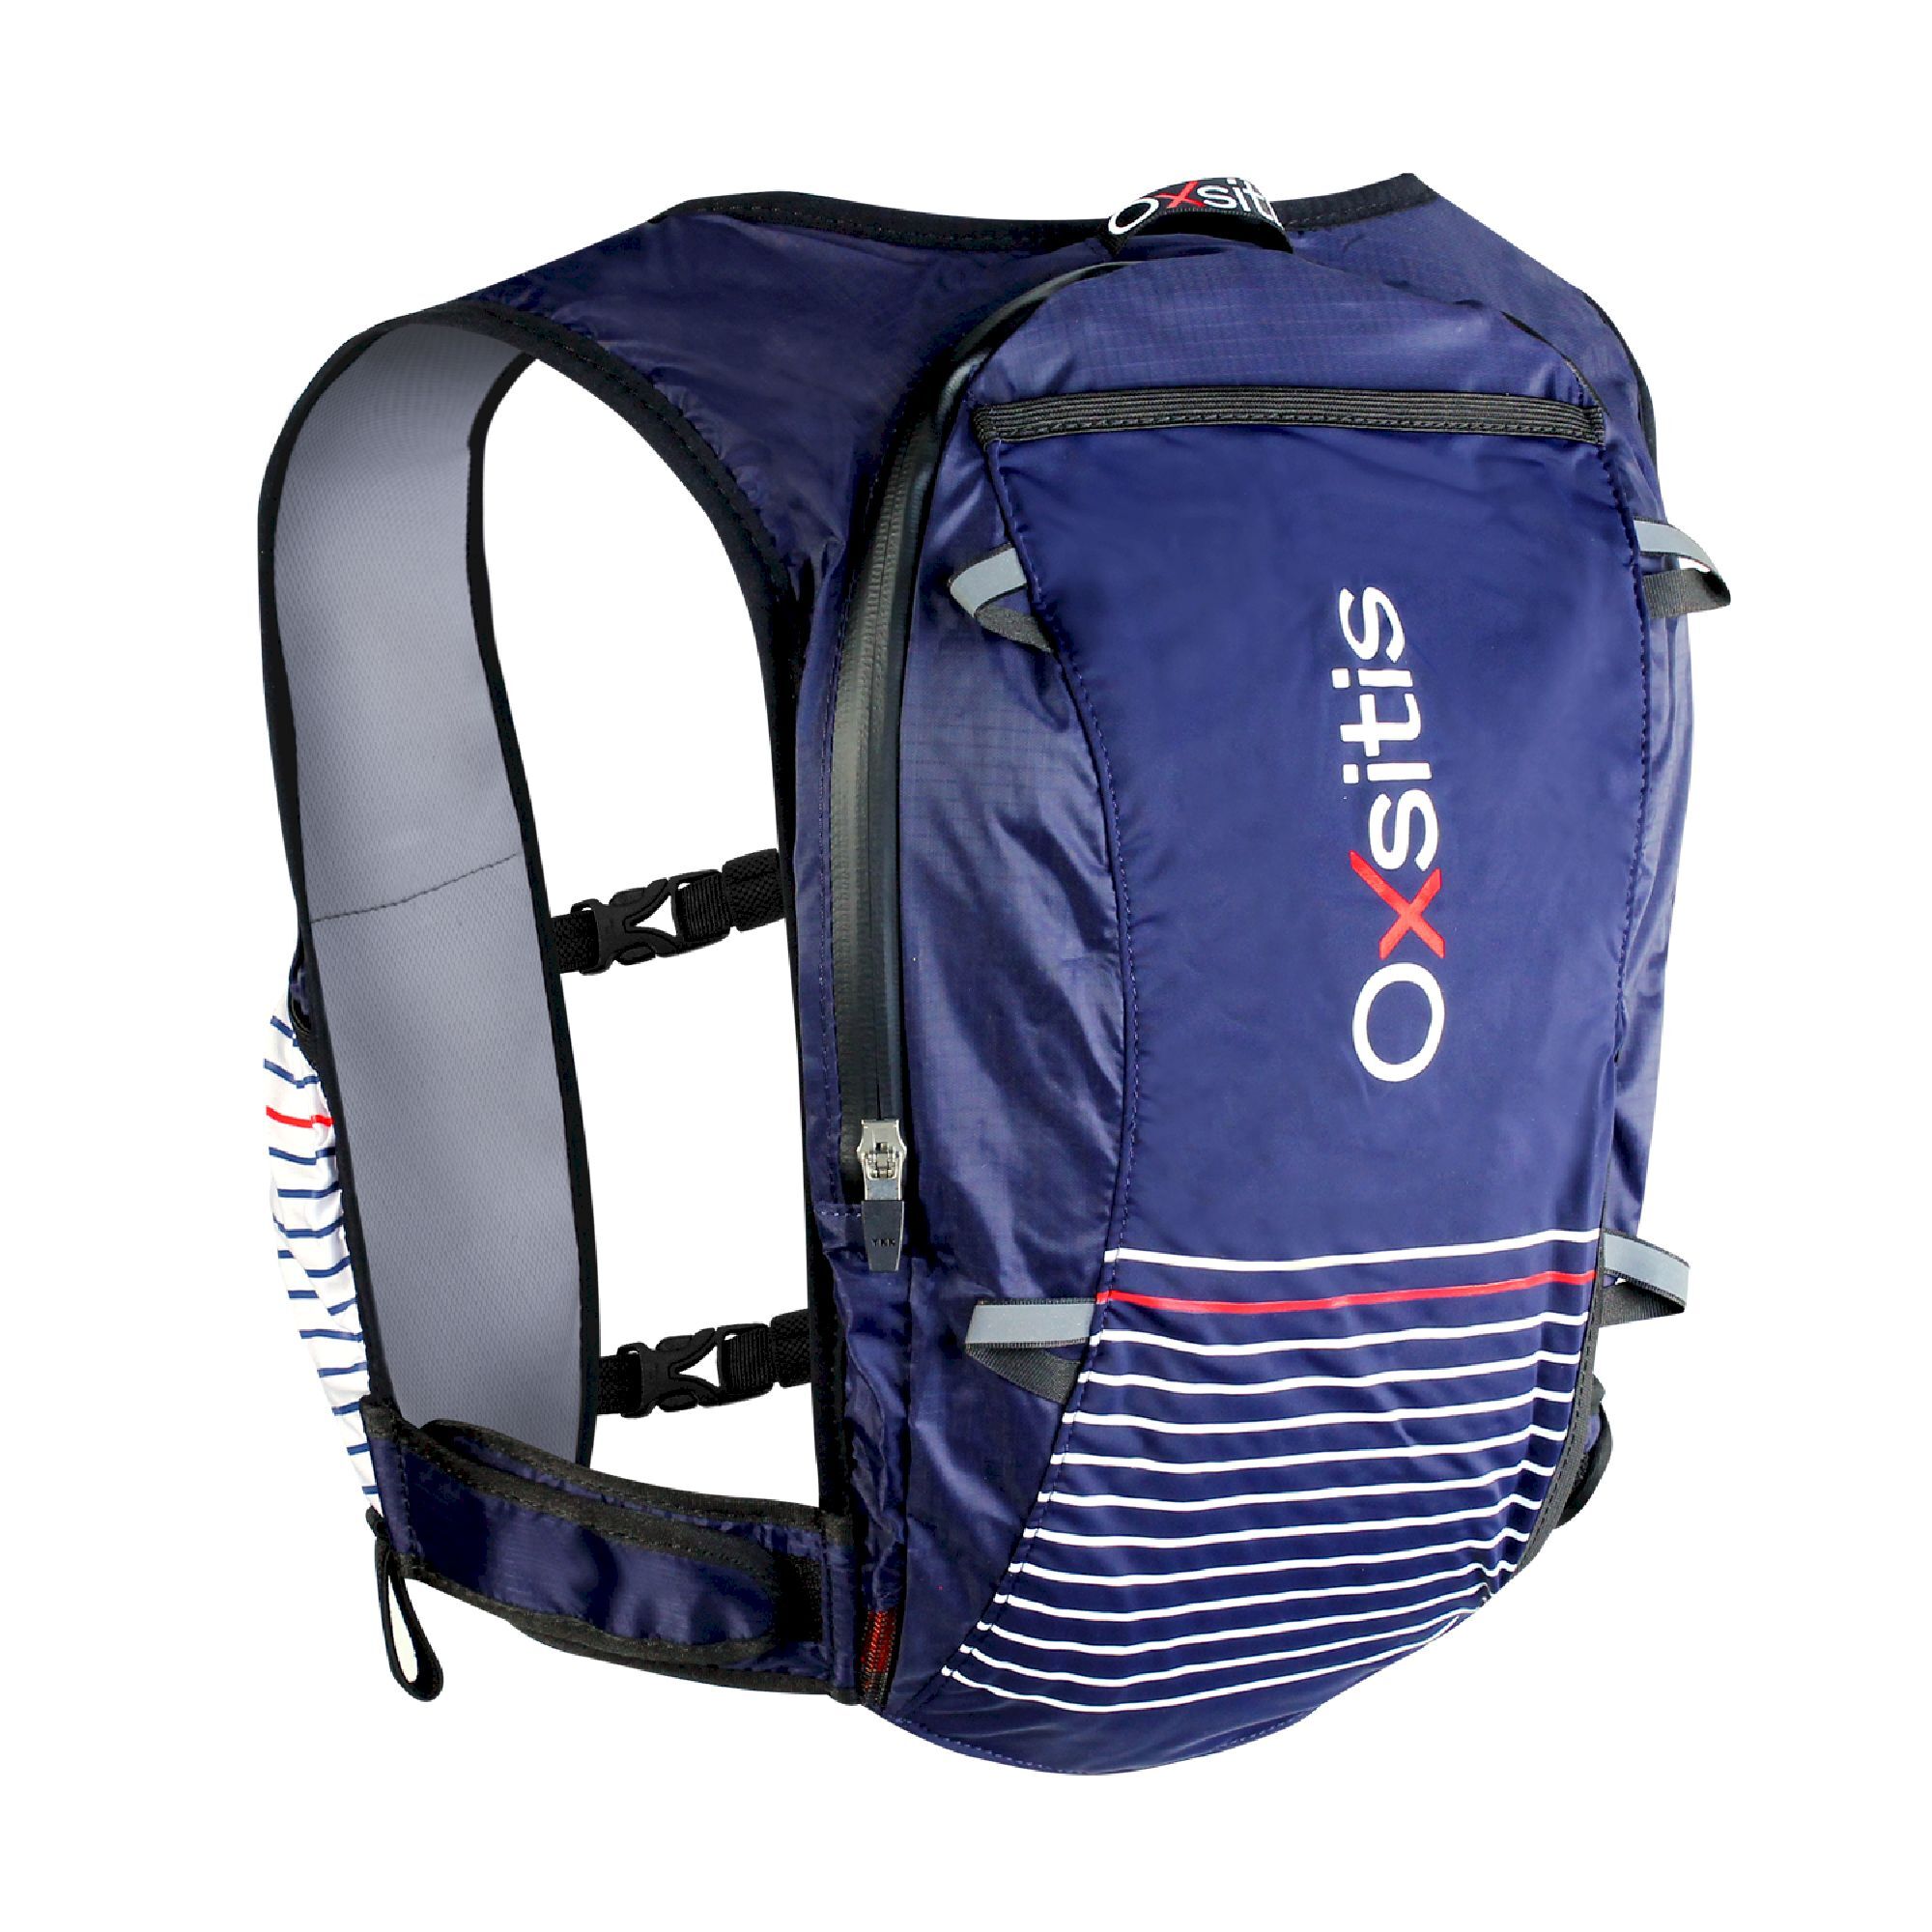 Oxsitis Pulse 12 BBR - Trail running backpack